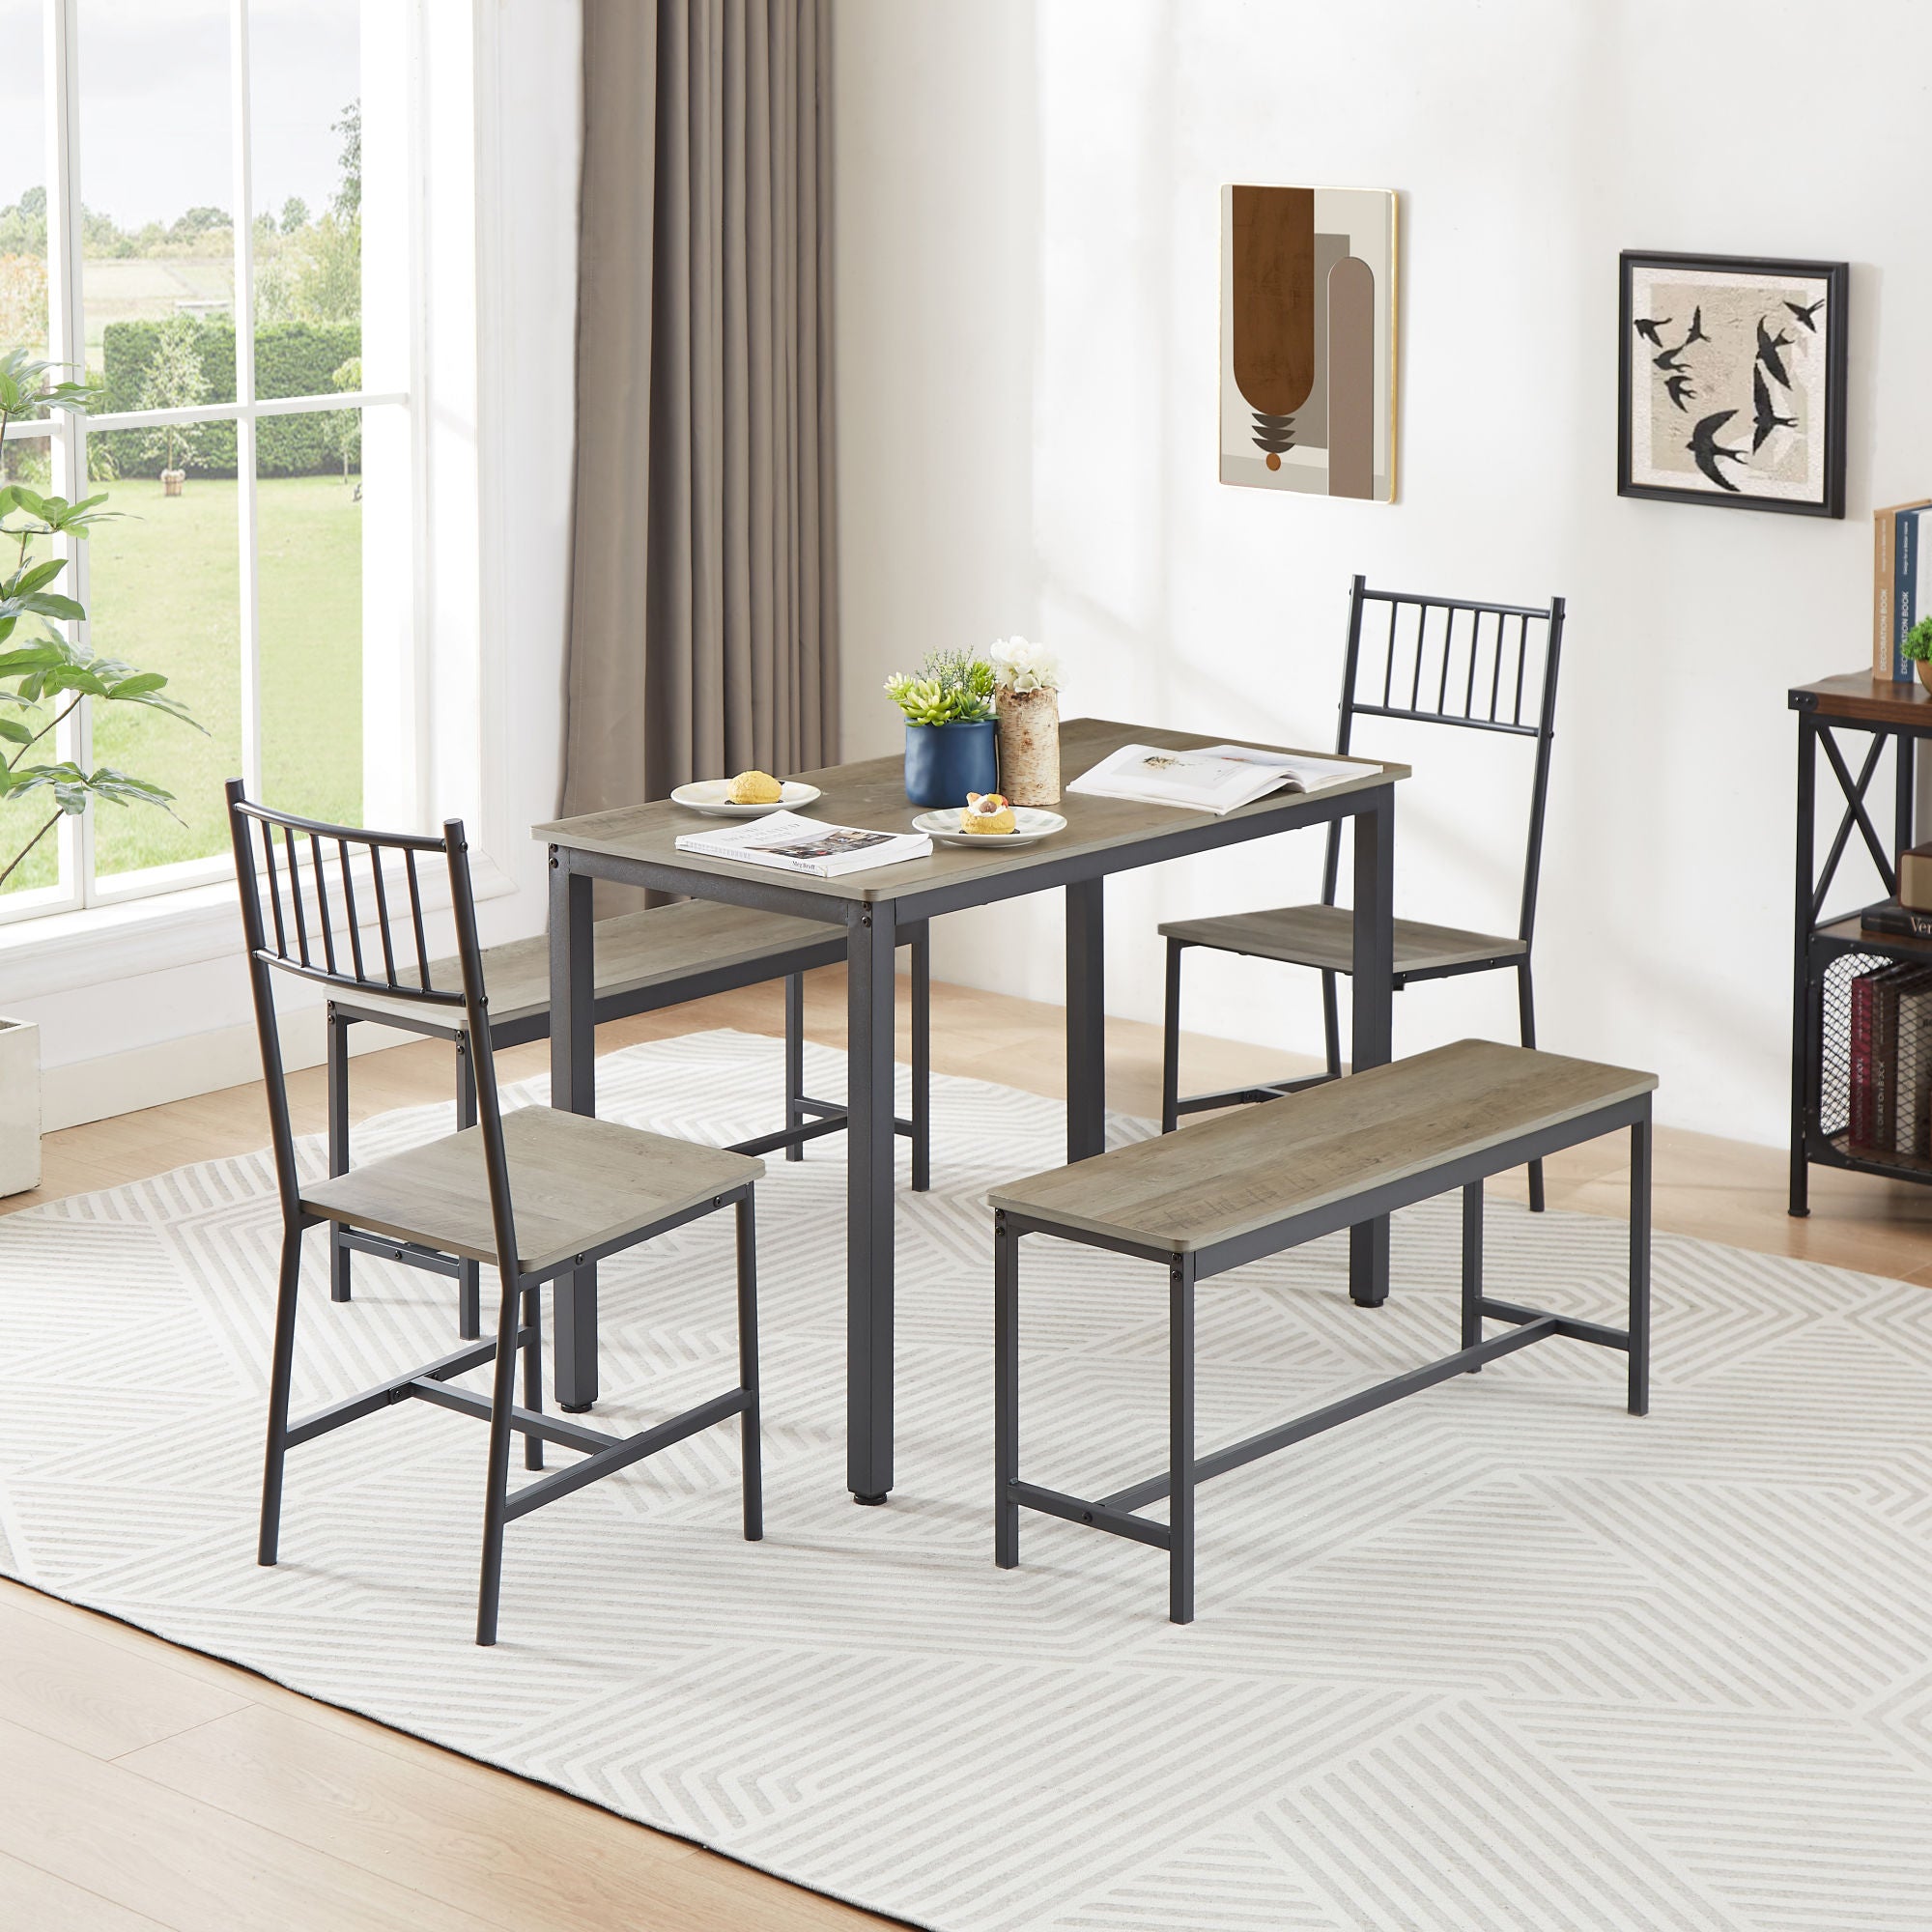 Dining Table Set, Barstool Dining Table with 2 Benches 2 Back Chairs, Industrial Dining Table for Kitchen Breakfast Table, Living Room, Party Room, Rustic Gray and Black,43.3″L x 23.6″W x 29.9″H